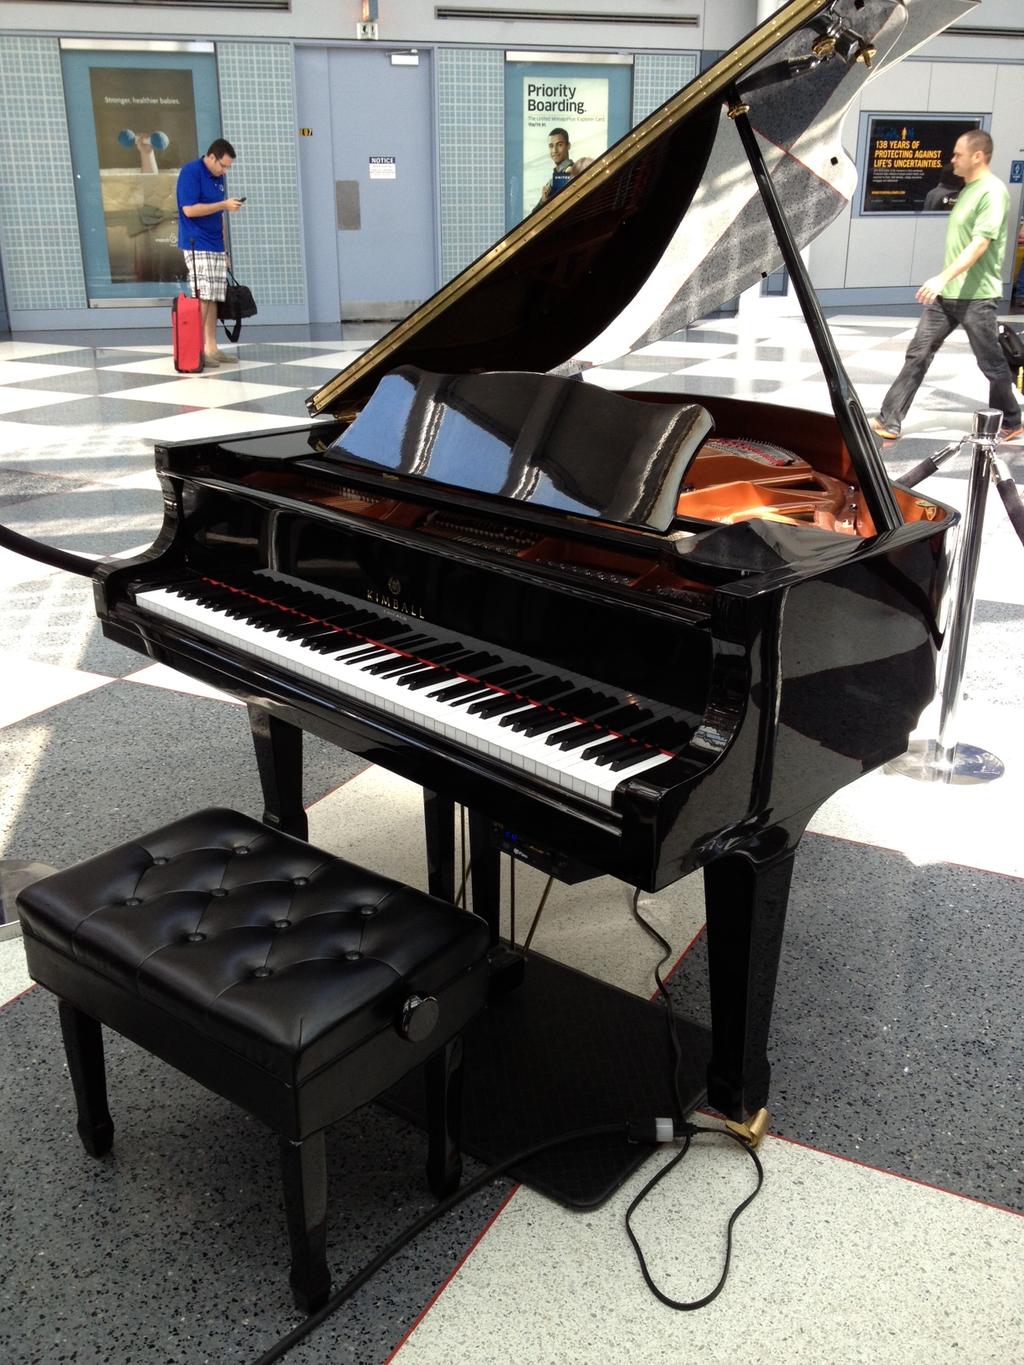 Chicago Airport 5/1/13 Kimbell Piano Kimball is an old American Brand name used by a now defunct US piano manufacturer.